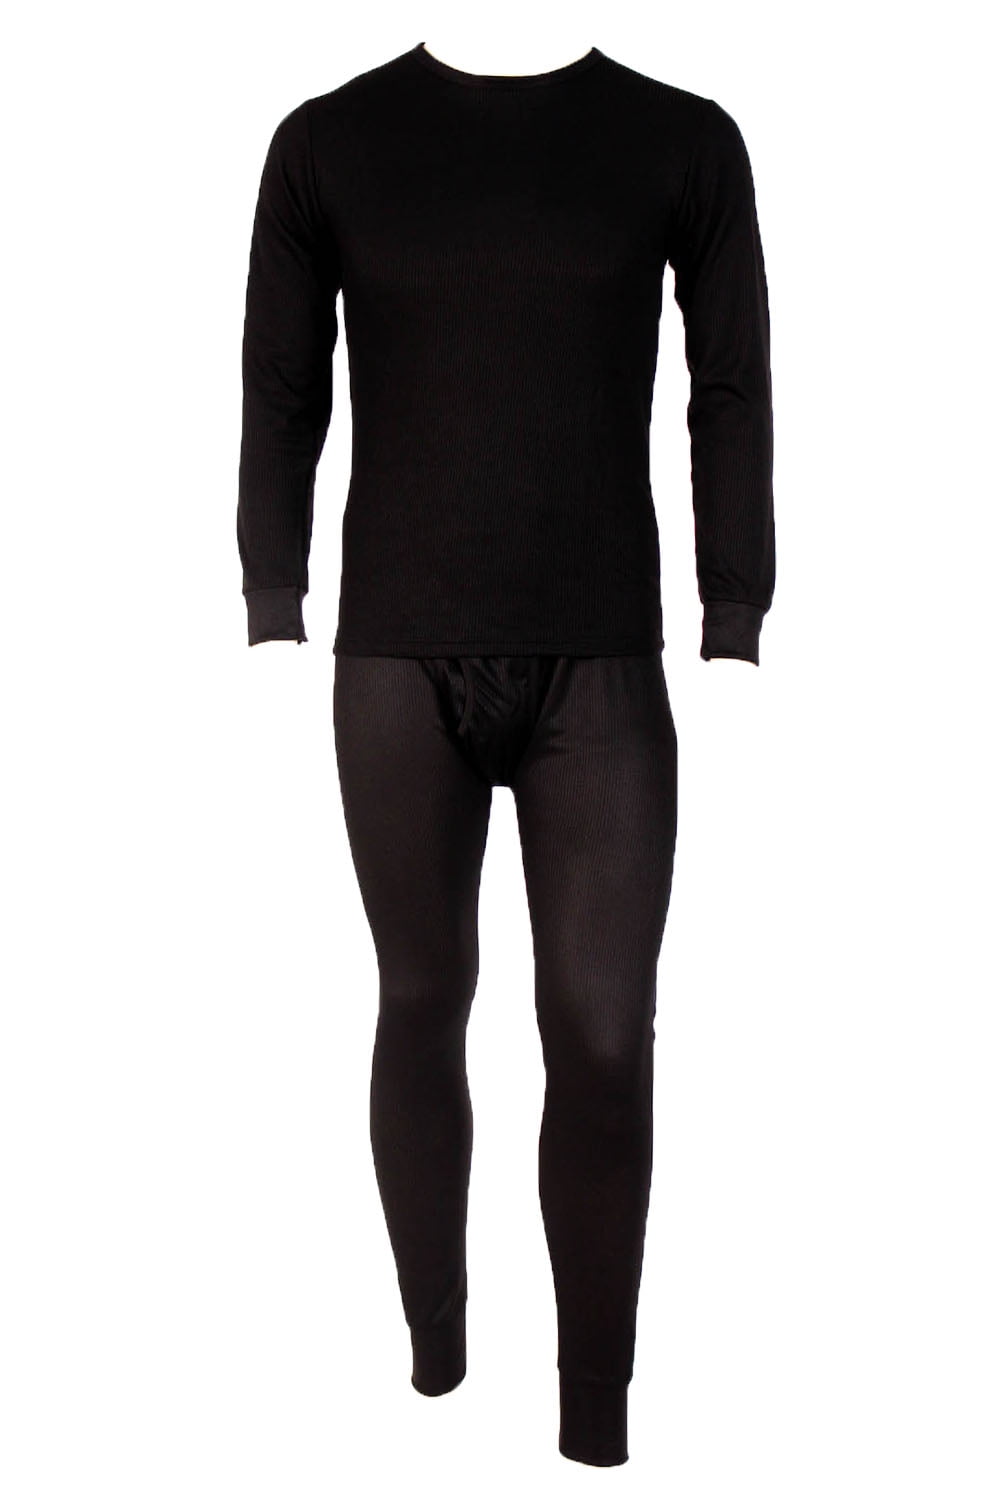 #followme Double Layer Thermal Underwear Set for Men Heavy Weight Long Johns